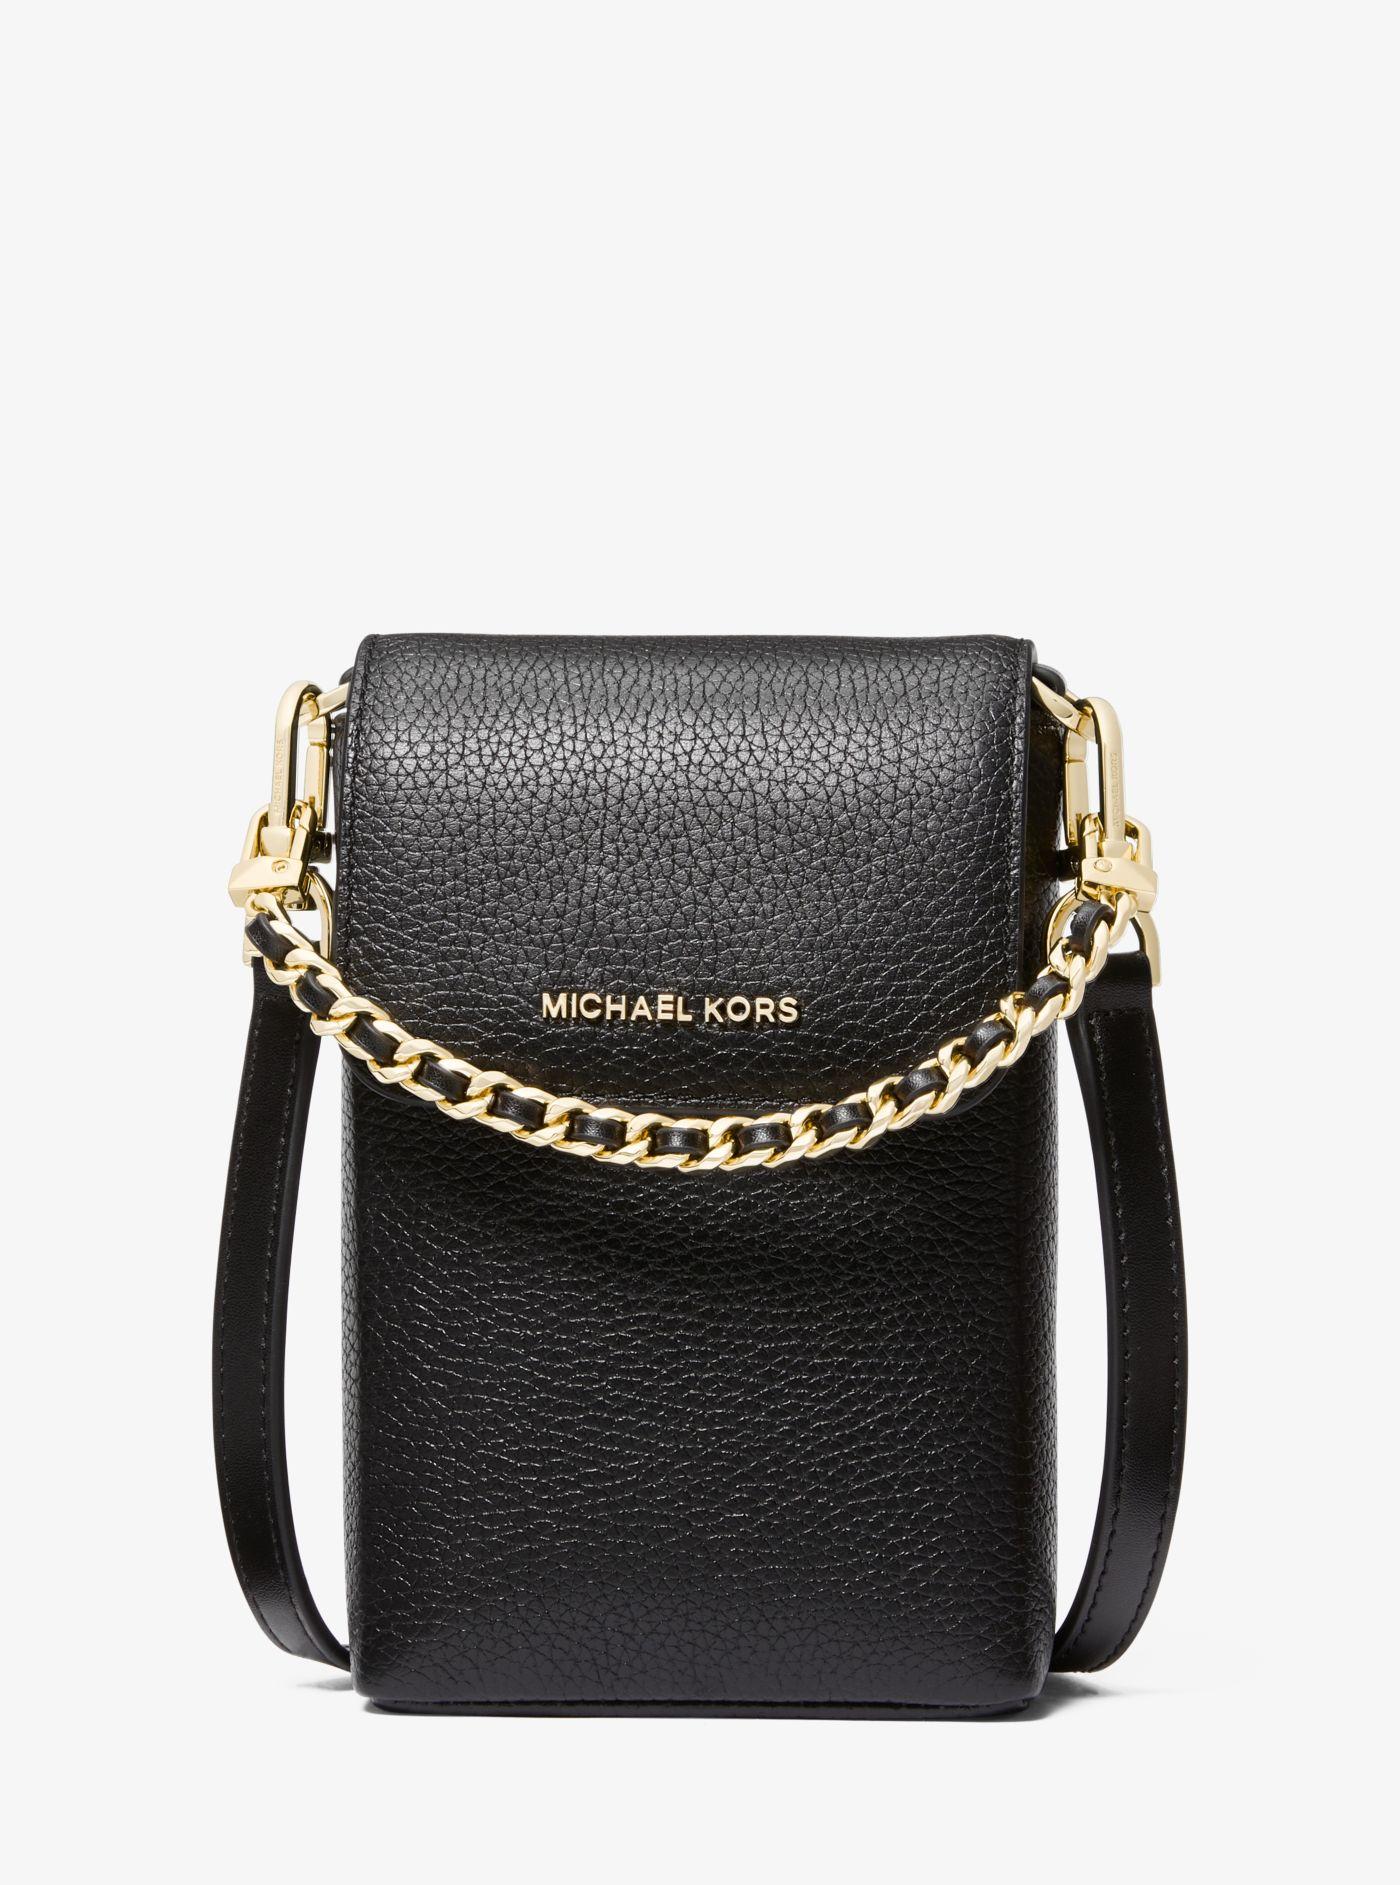 Michael Kors Jet Set Small Pebbled Leather Chain-link Smartphone ...